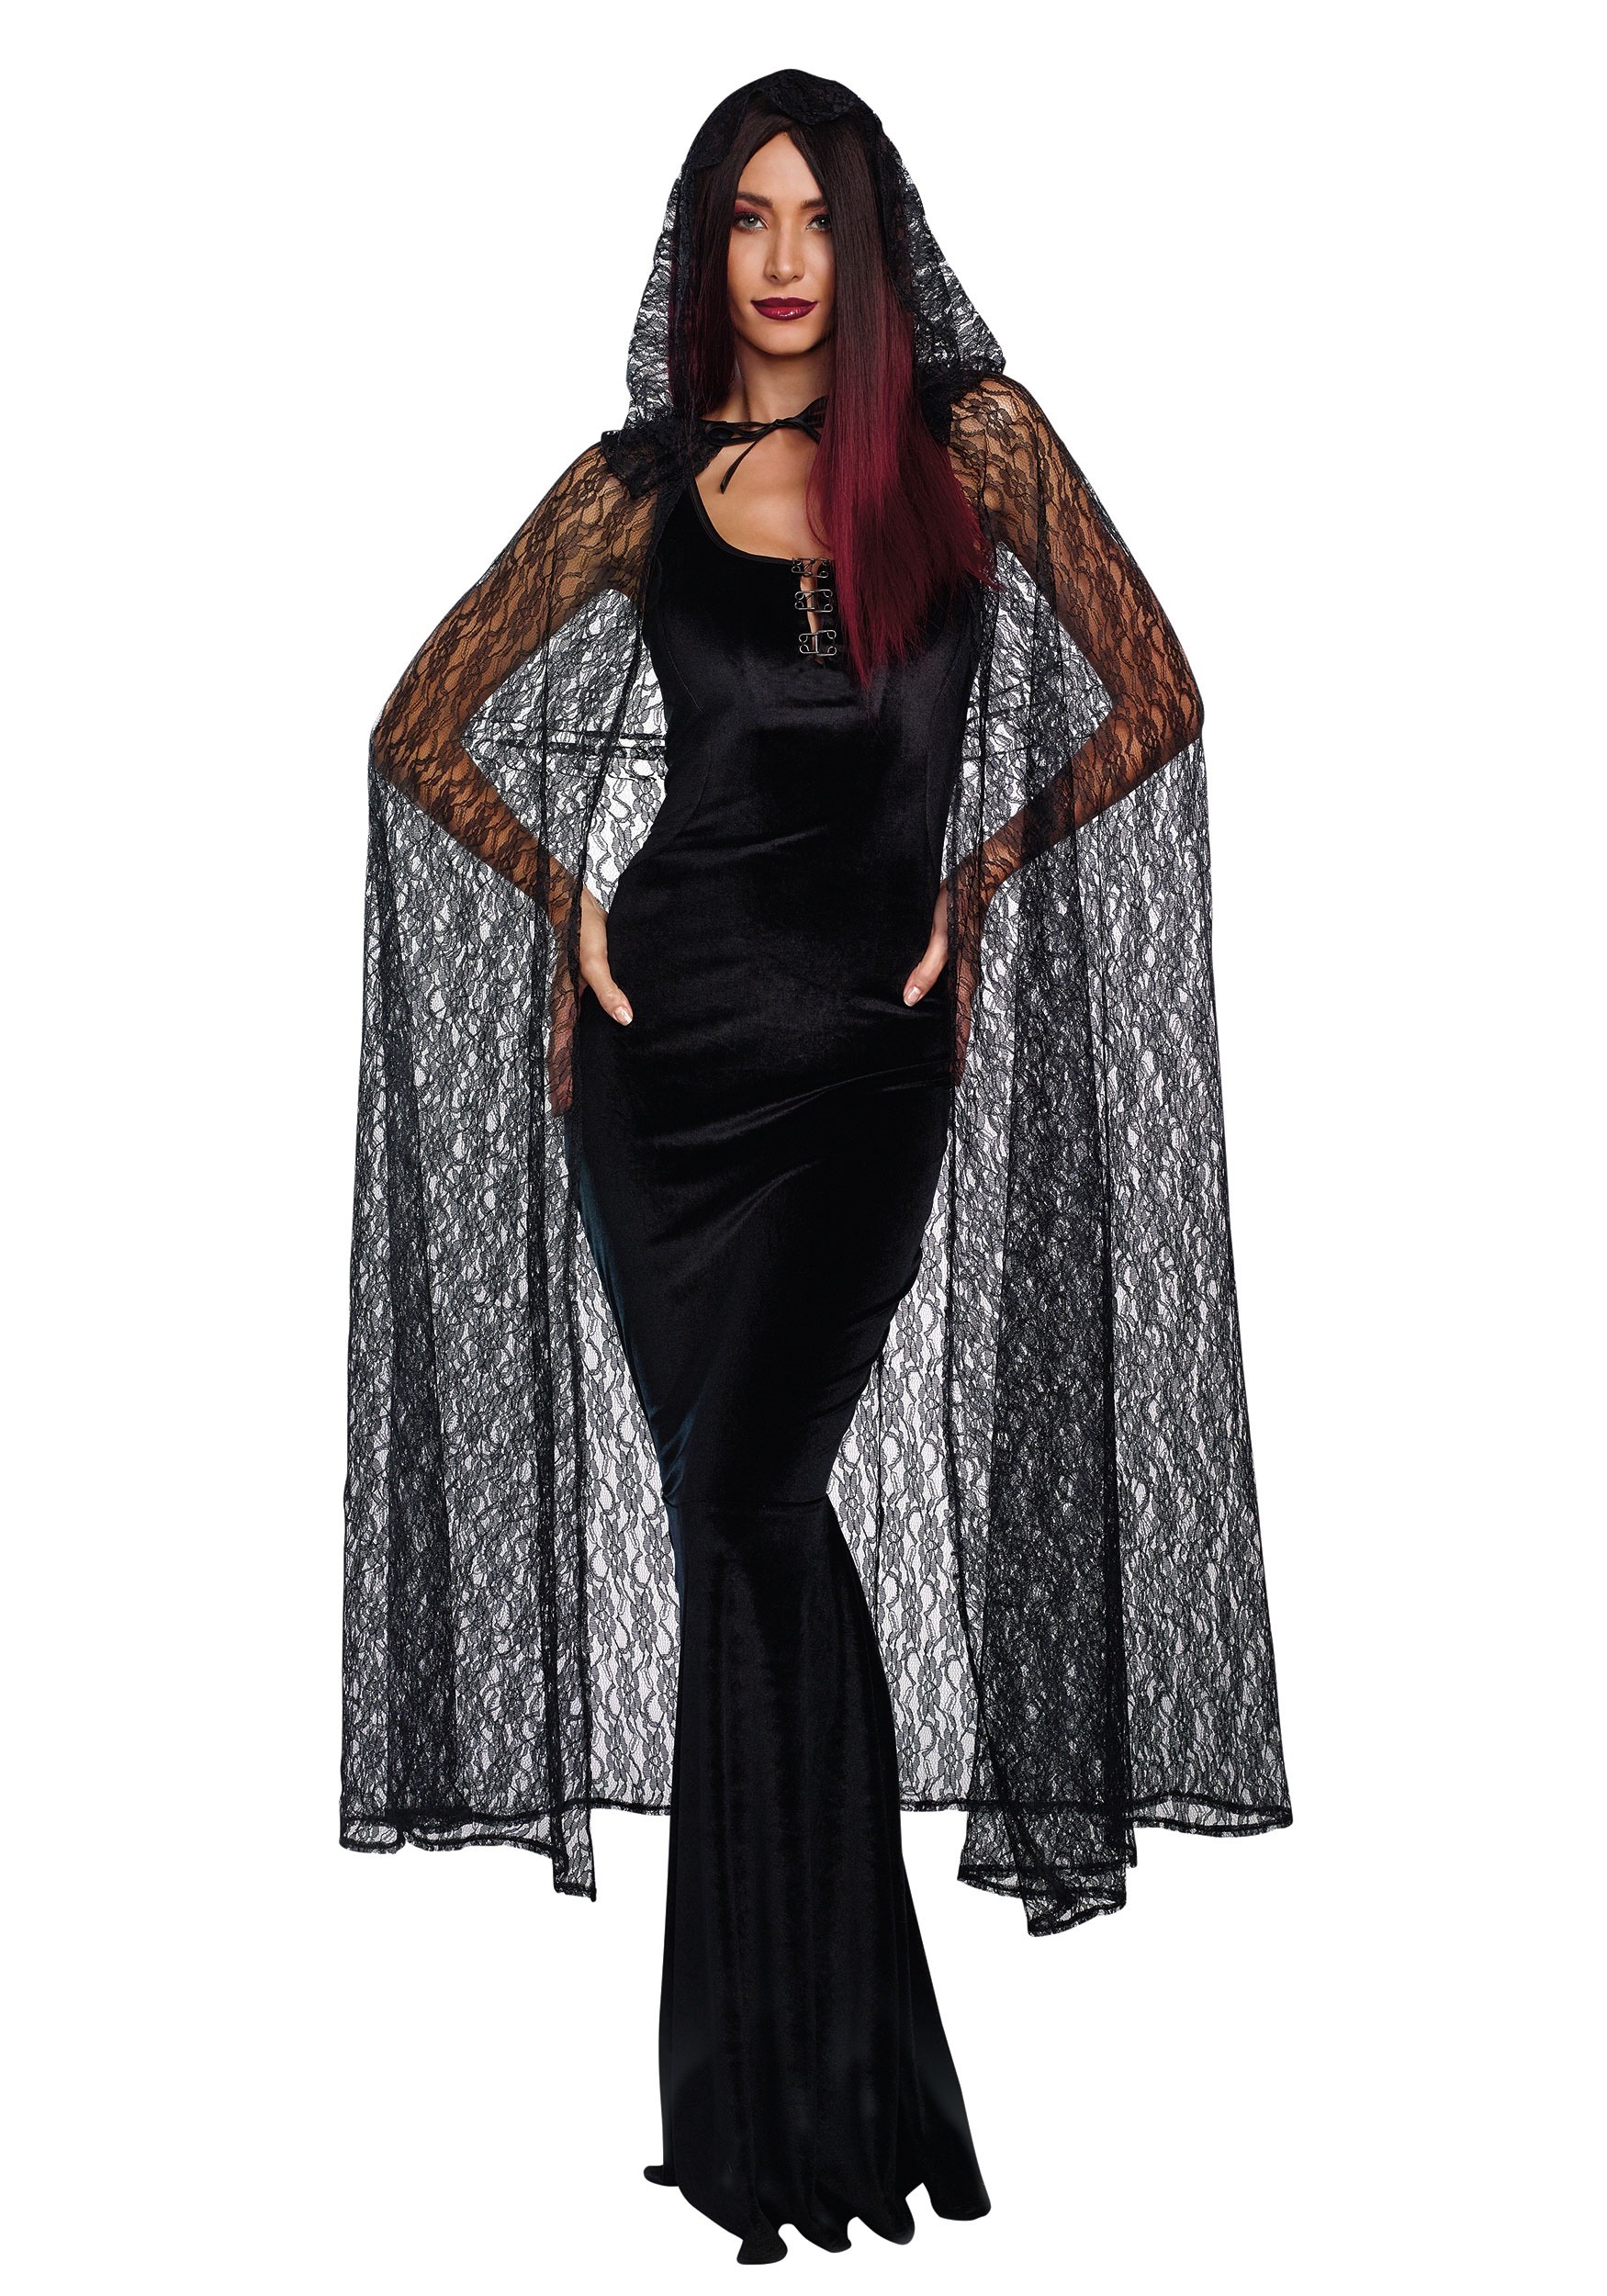 https://images.halloweencostumes.ca/products/45492/1-1/gothic-lace-womens-cape.jpg